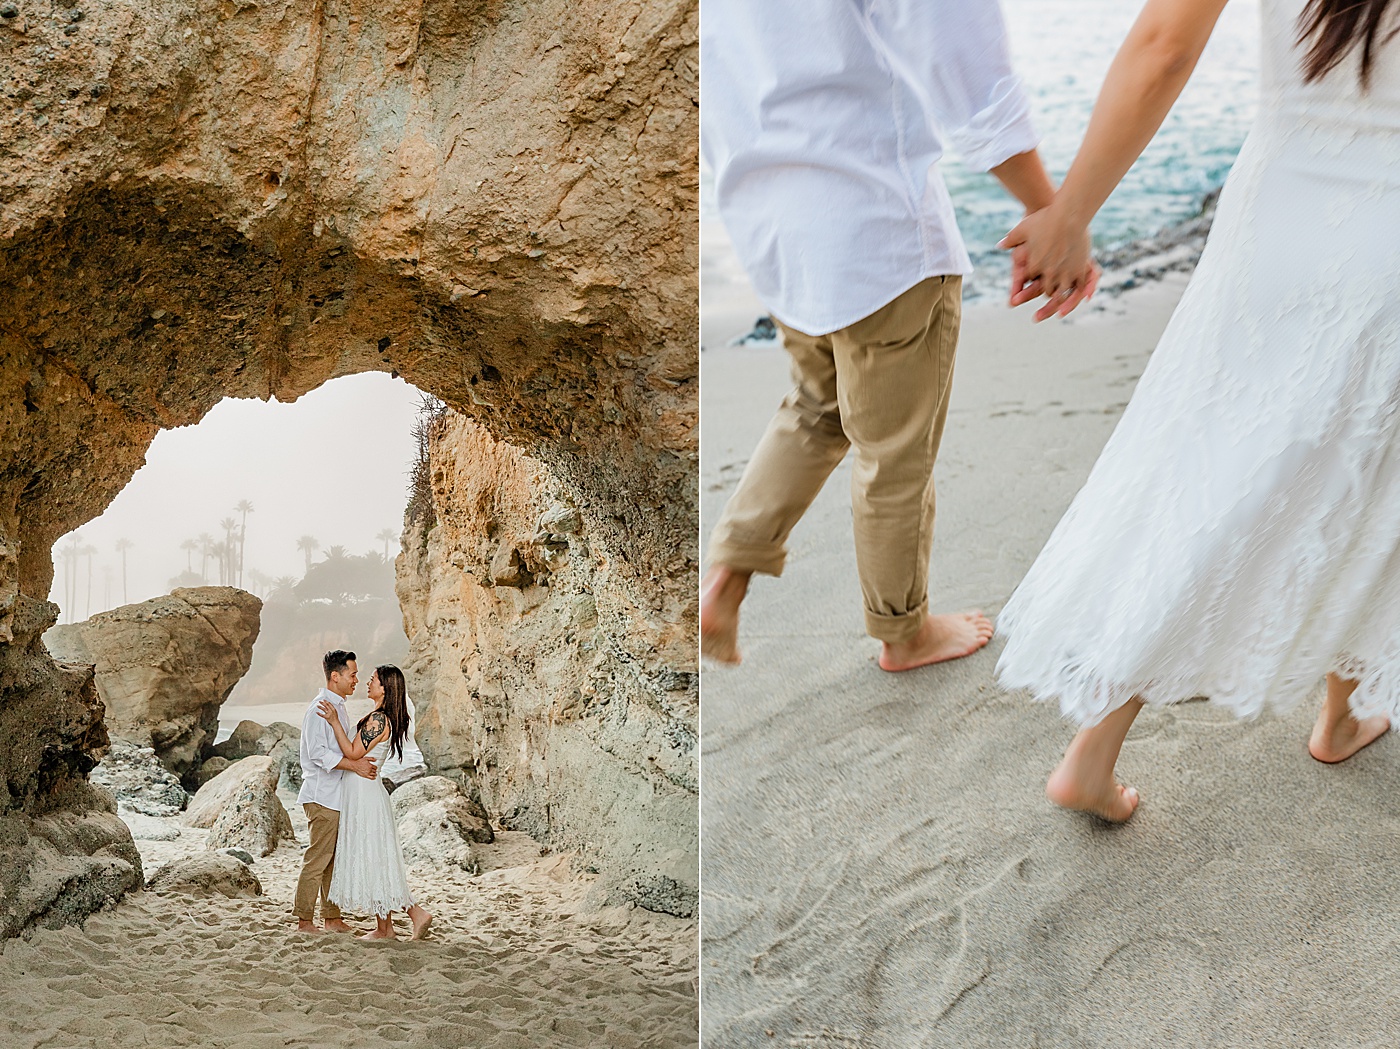 engaged couple in tunnel at treasure island park, and walking on the beach holding hands